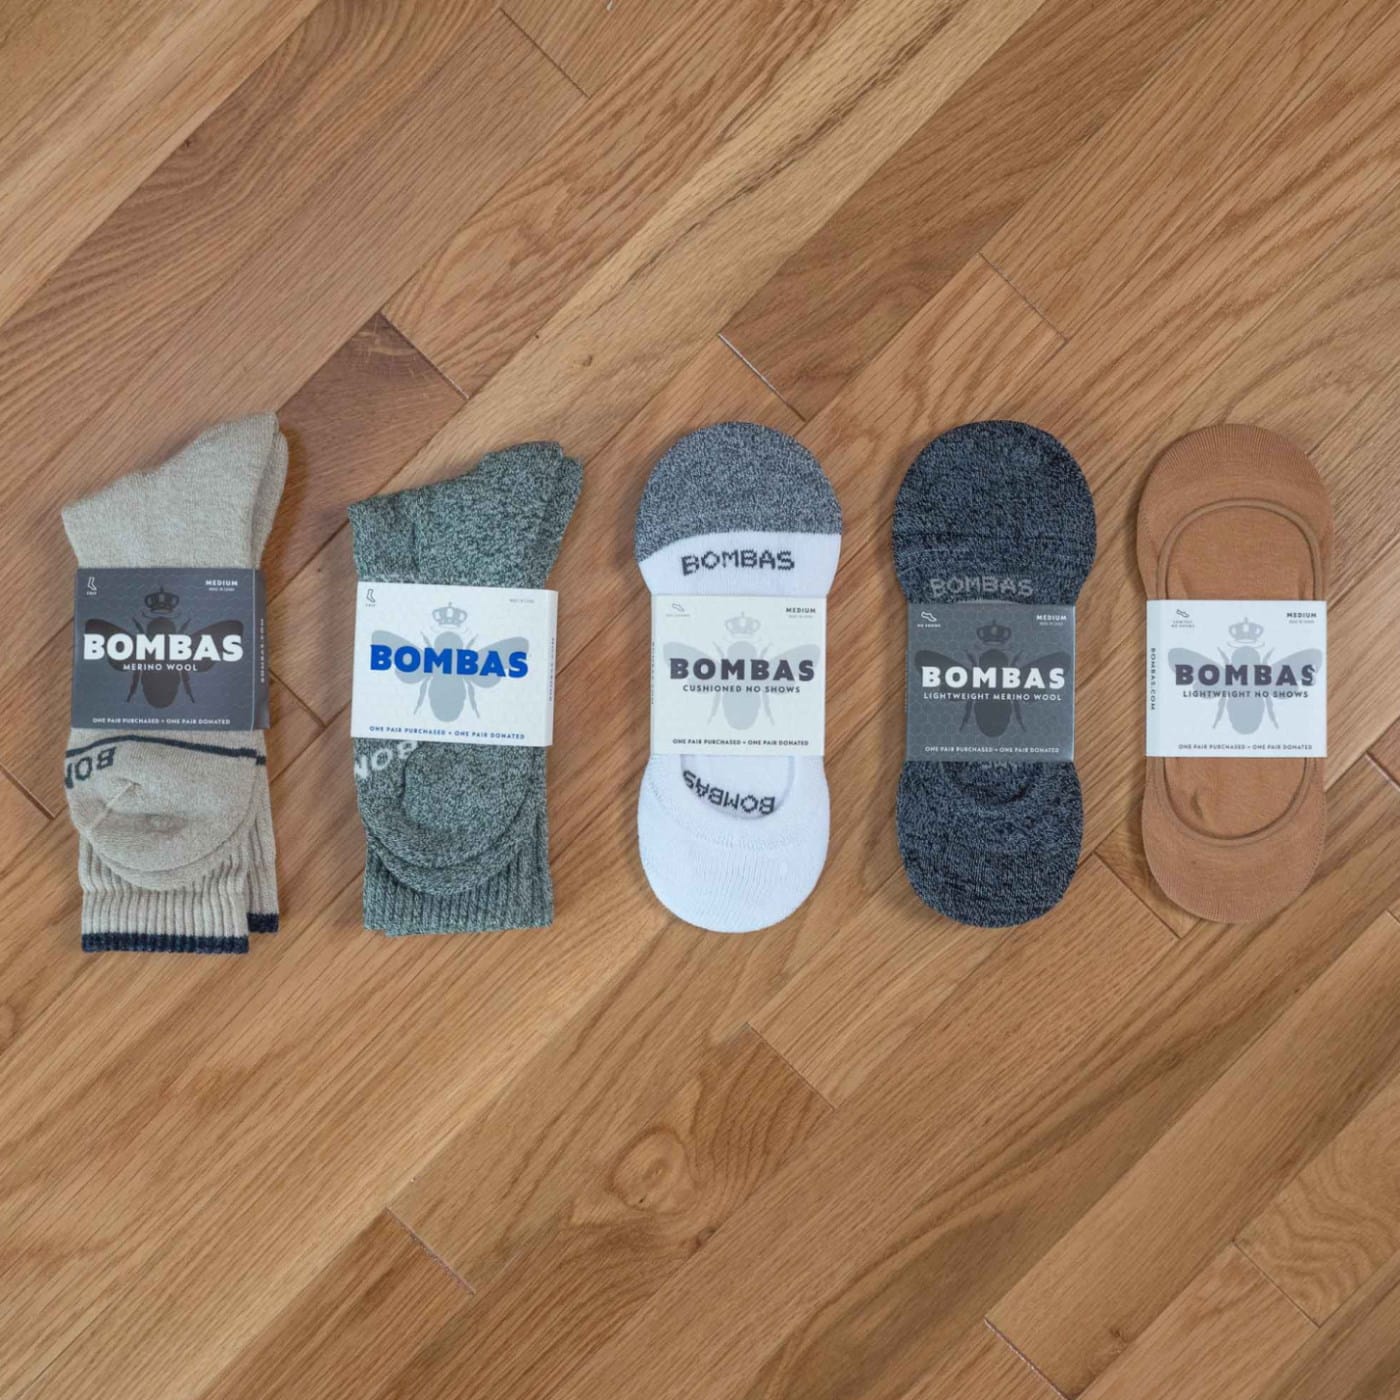 Bombas Review: I Tried Everything They Make - The Modest Man